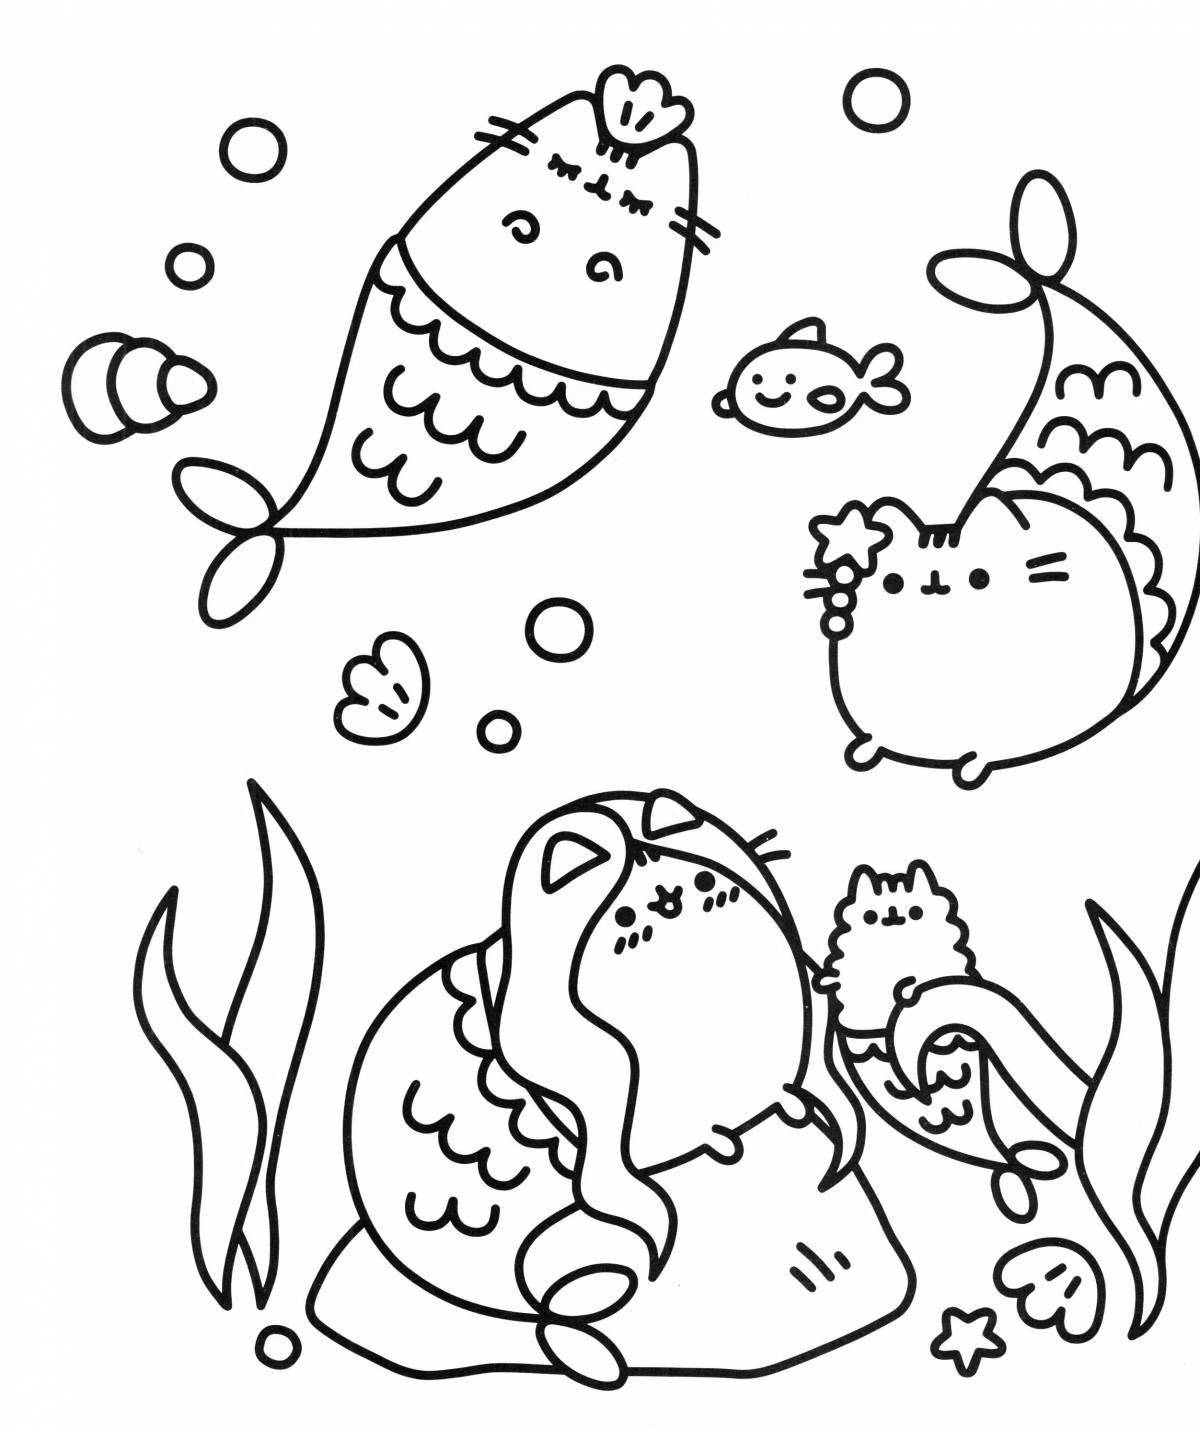 Animated pusheen coloring page for kids